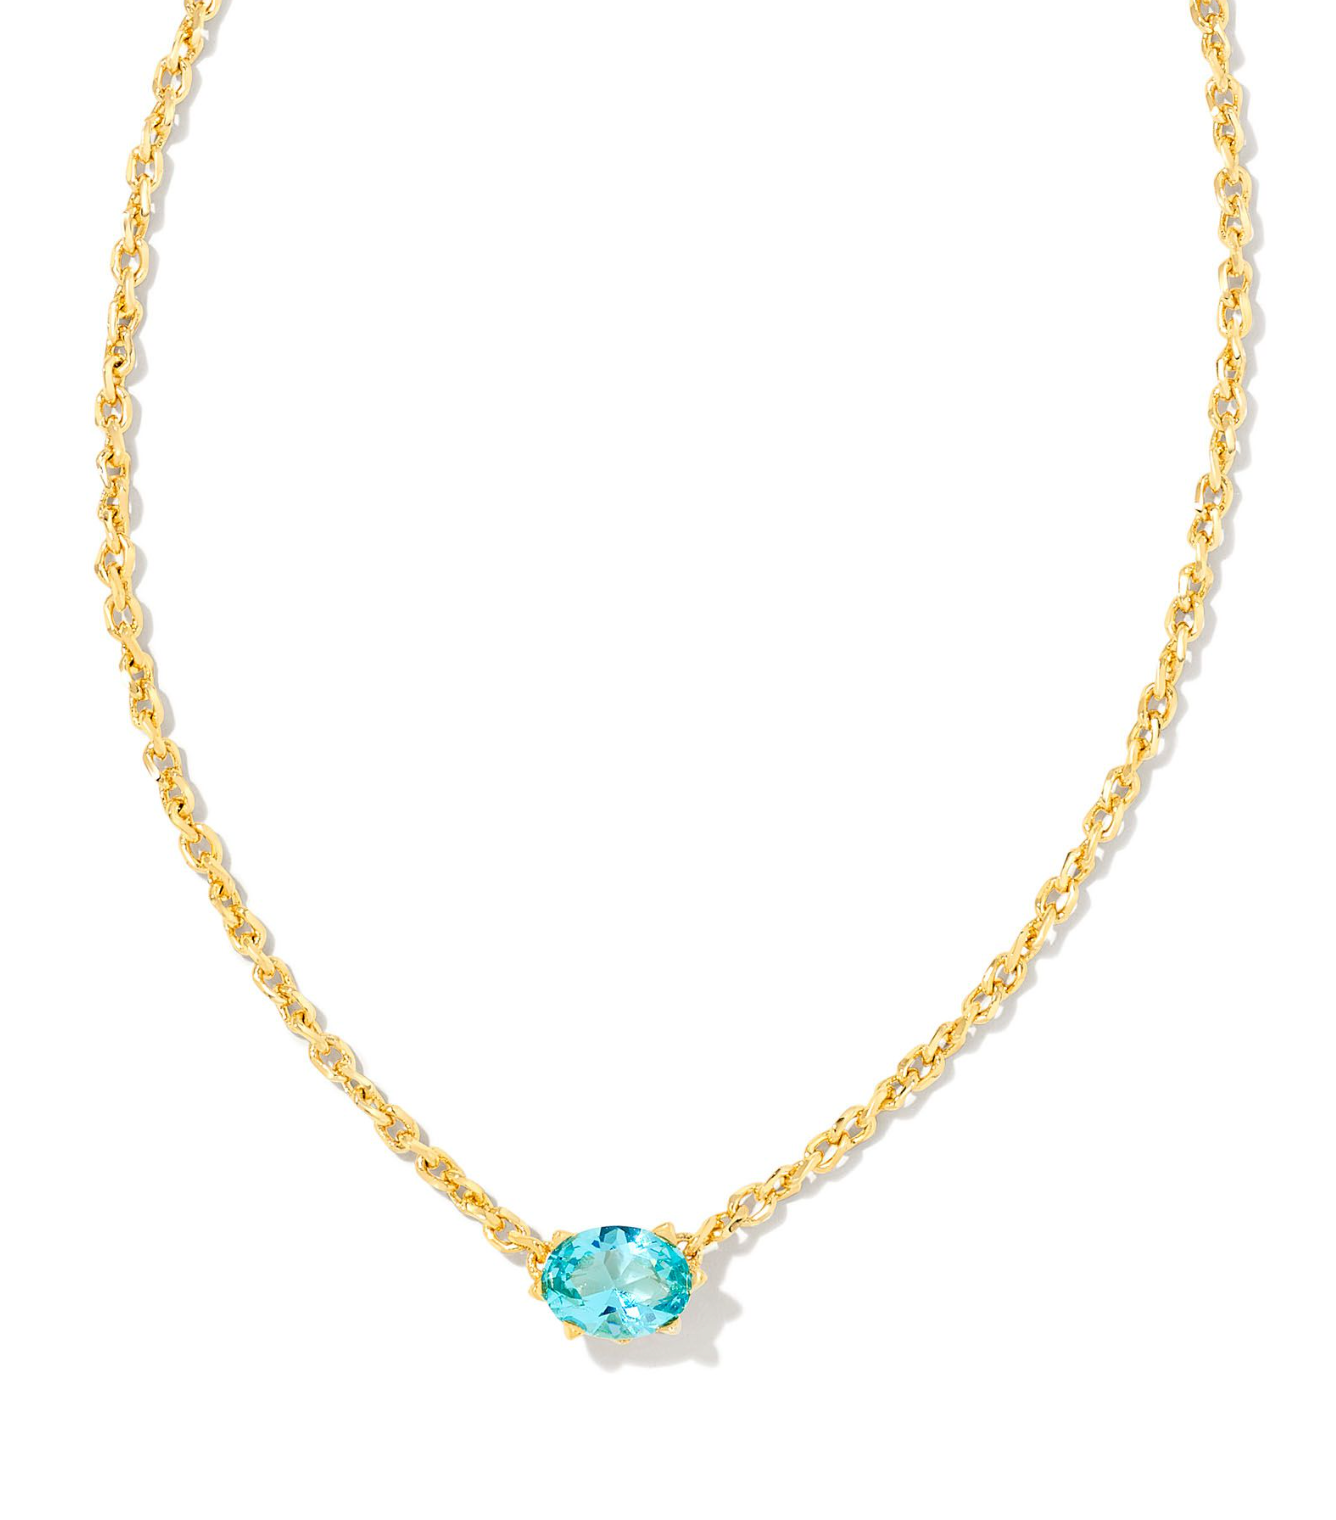 Cailin Gold Pendant Necklace in Aqua Crystal | KENDRA SCOTT - The Street Boutique 